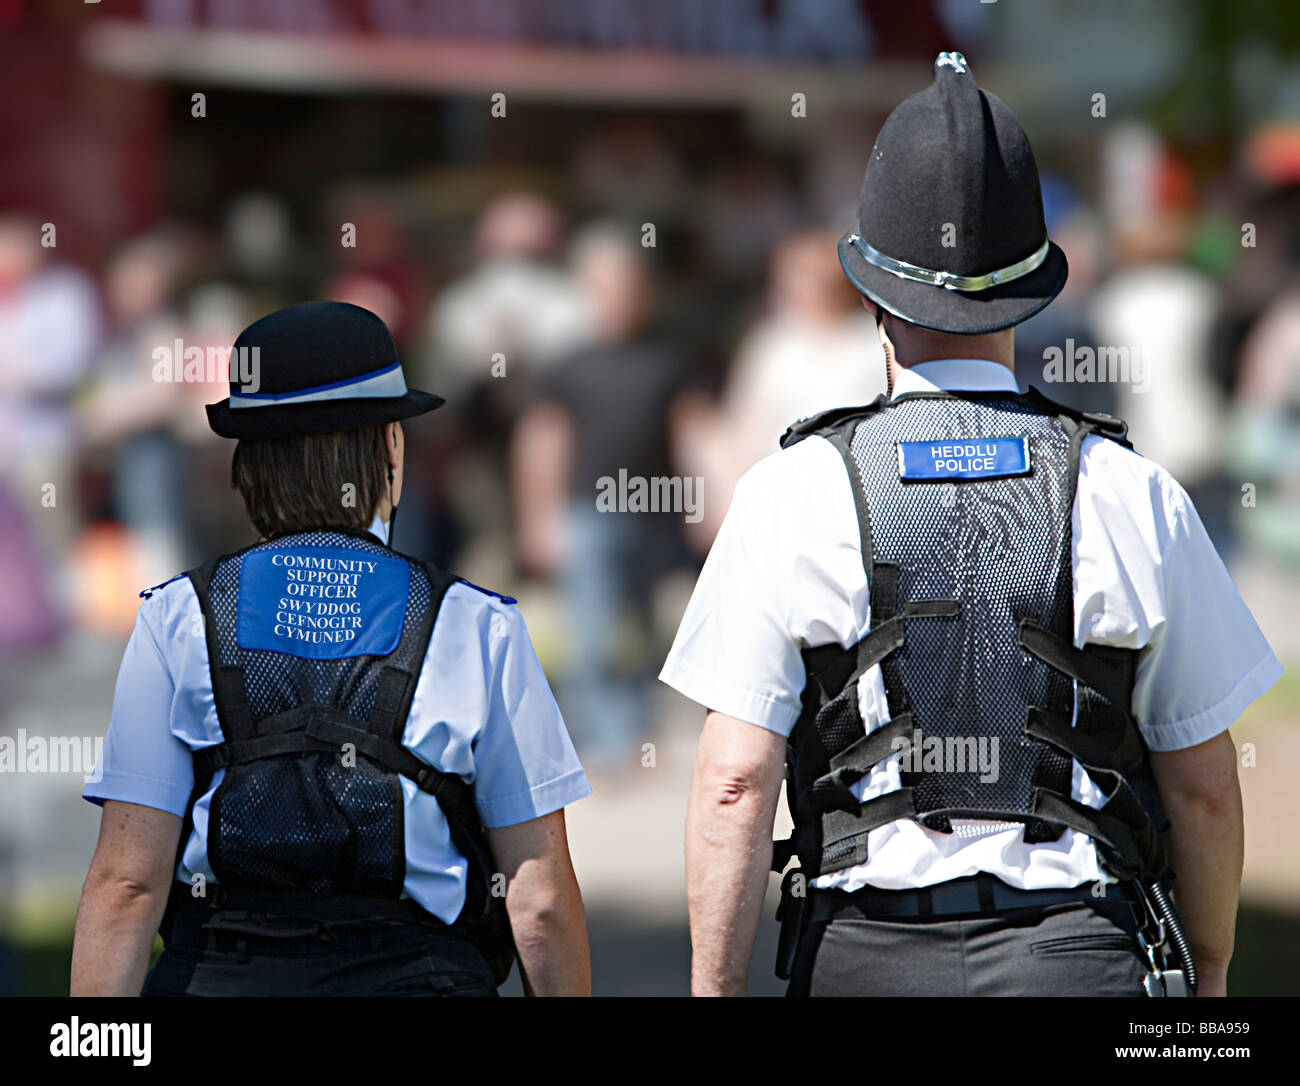 Community police officer with policeman walking through crowd at fair showing police labels in Welsh and English Wales UK Stock Photo